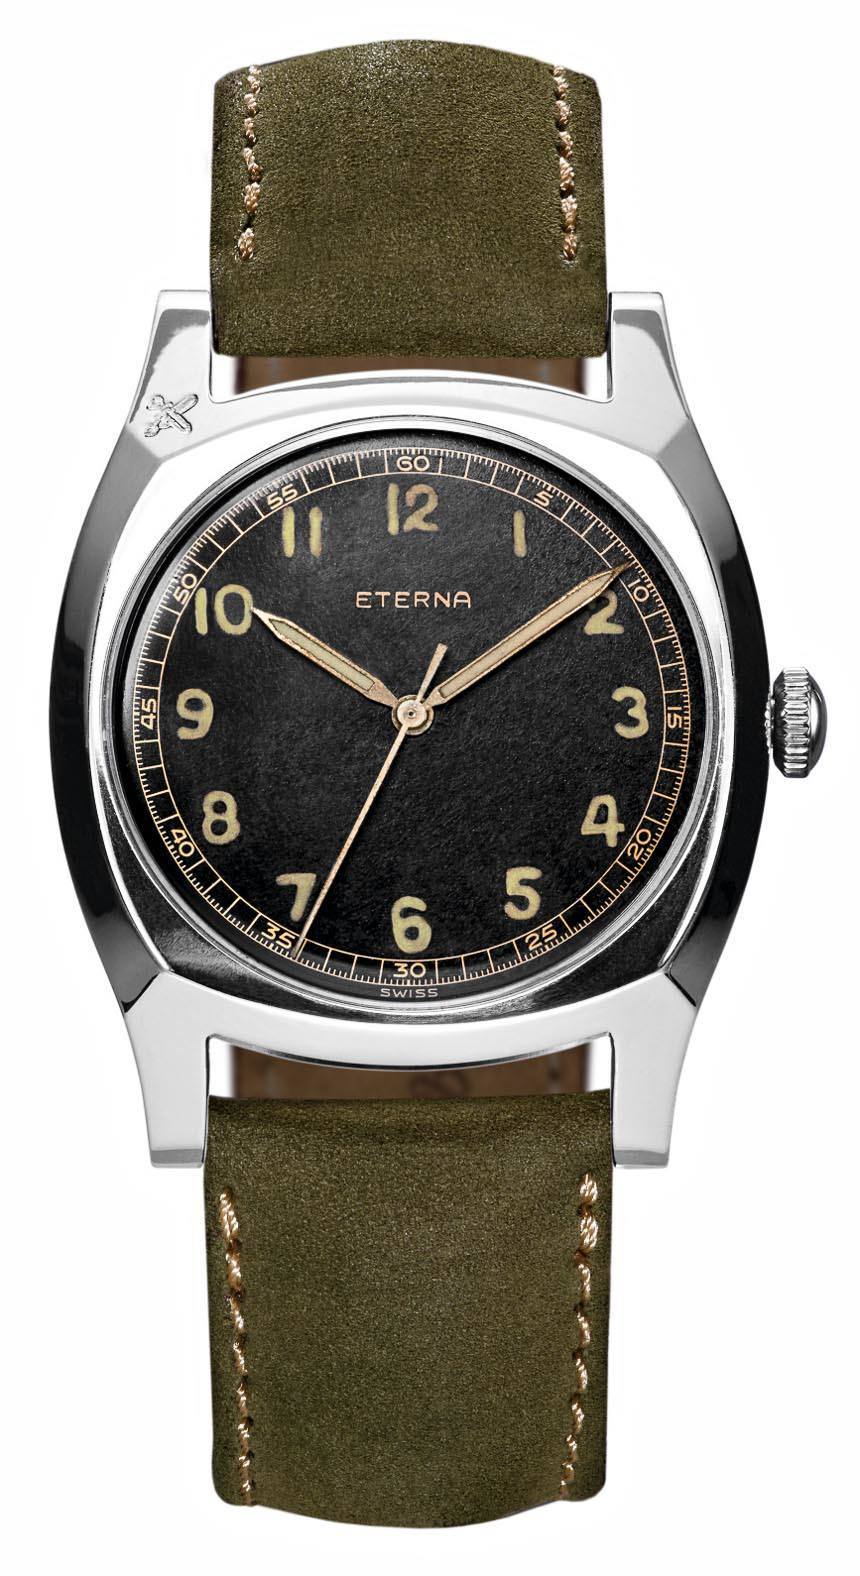 Eterna-Heritage-Military-limited-edition-watch-1